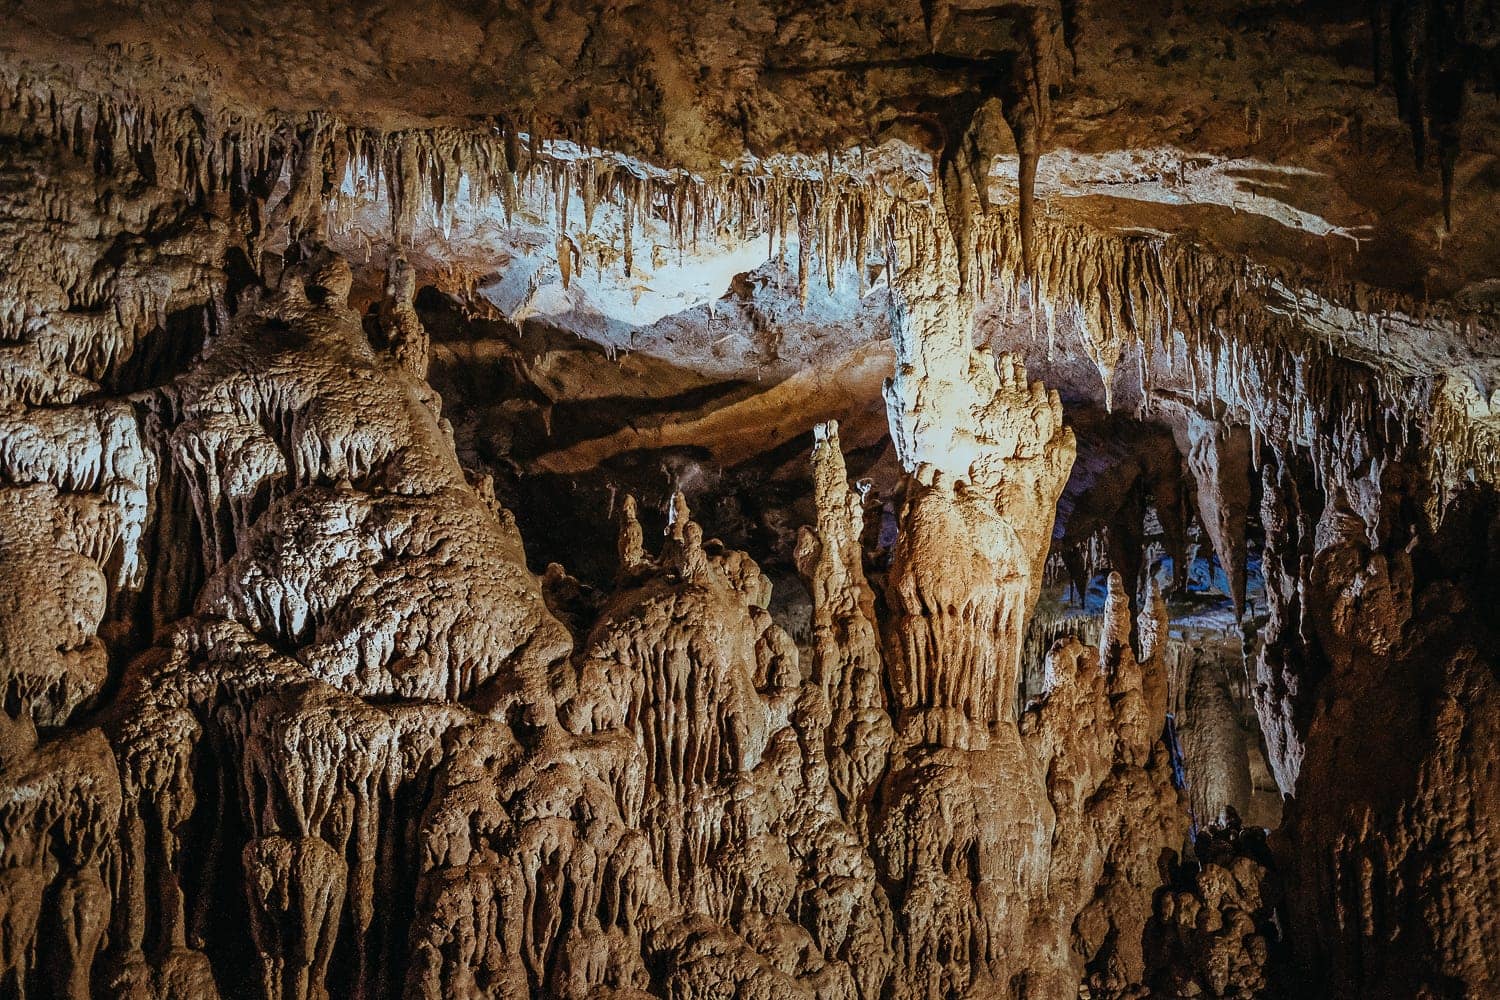 Prometheus Cave from the inside